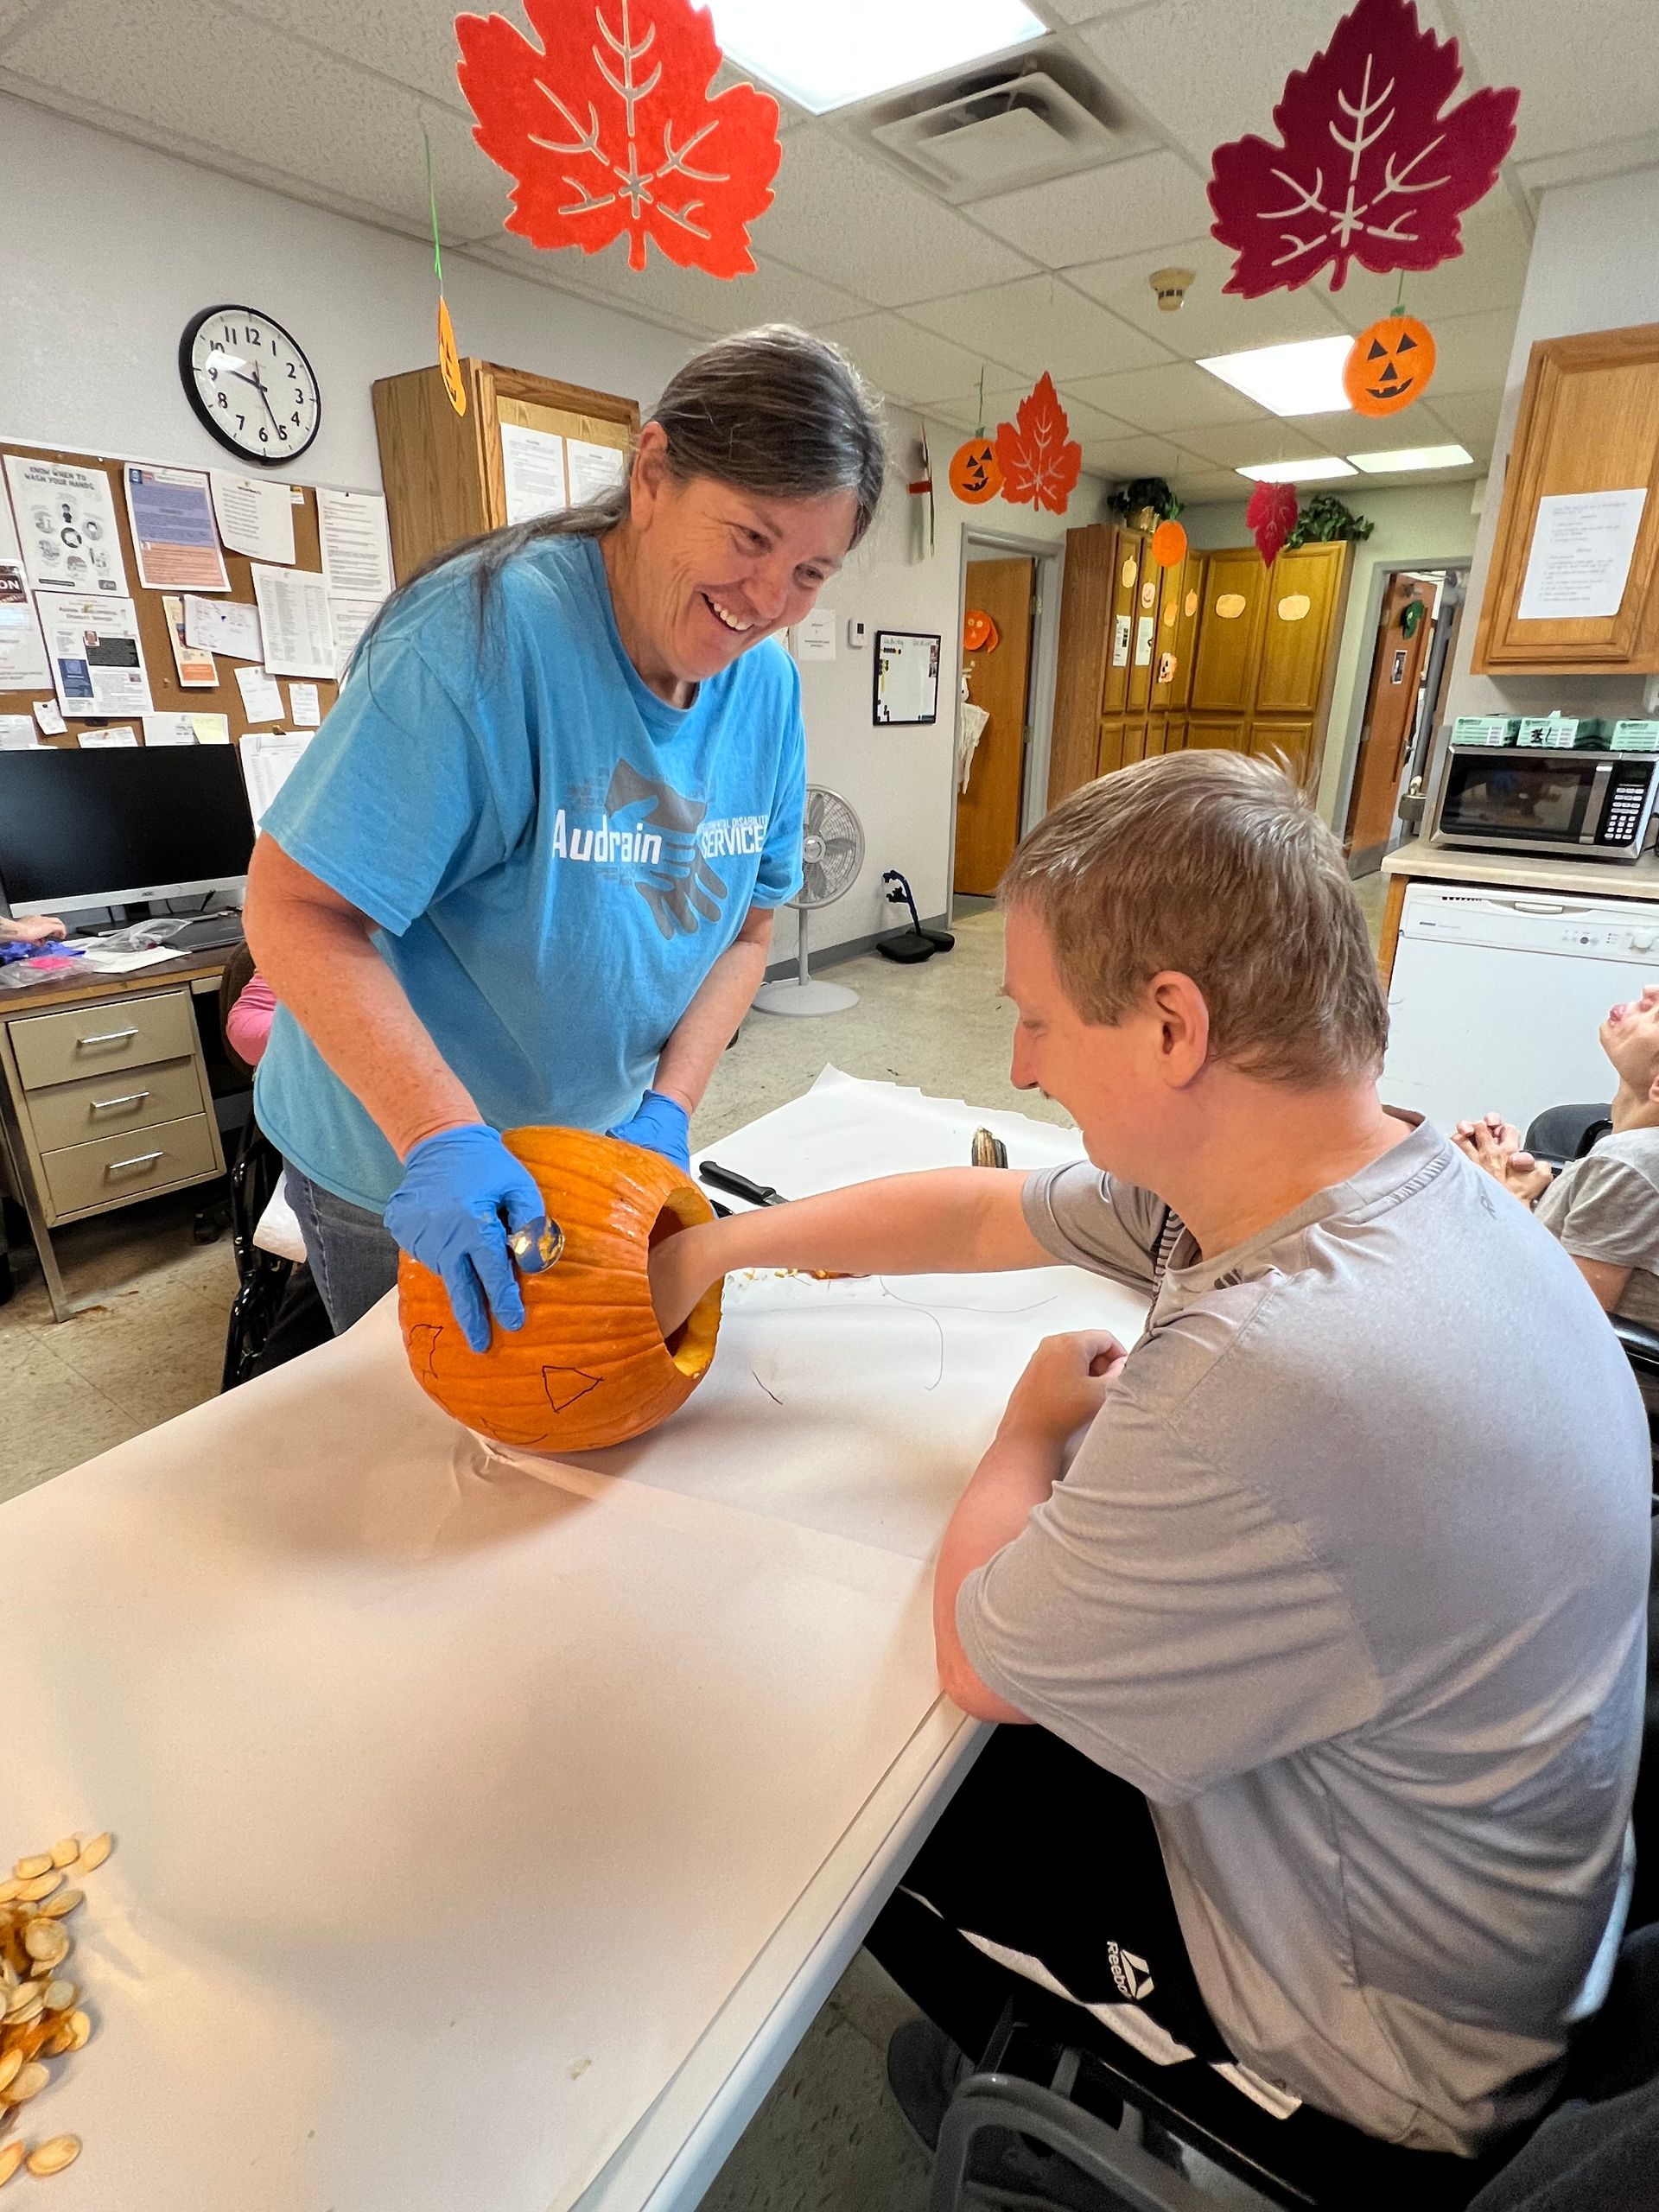 a woman in a blue shirt that says audrain on it is carving a pumpkin